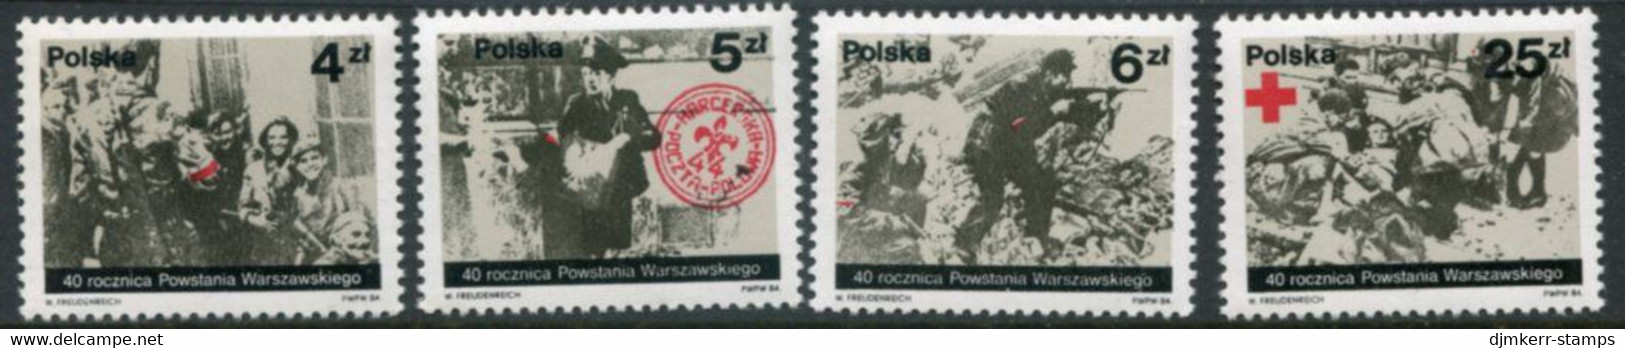 POLAND 1984 Warsaw Rising MNH / **.  Michel 2930-33 - Unused Stamps